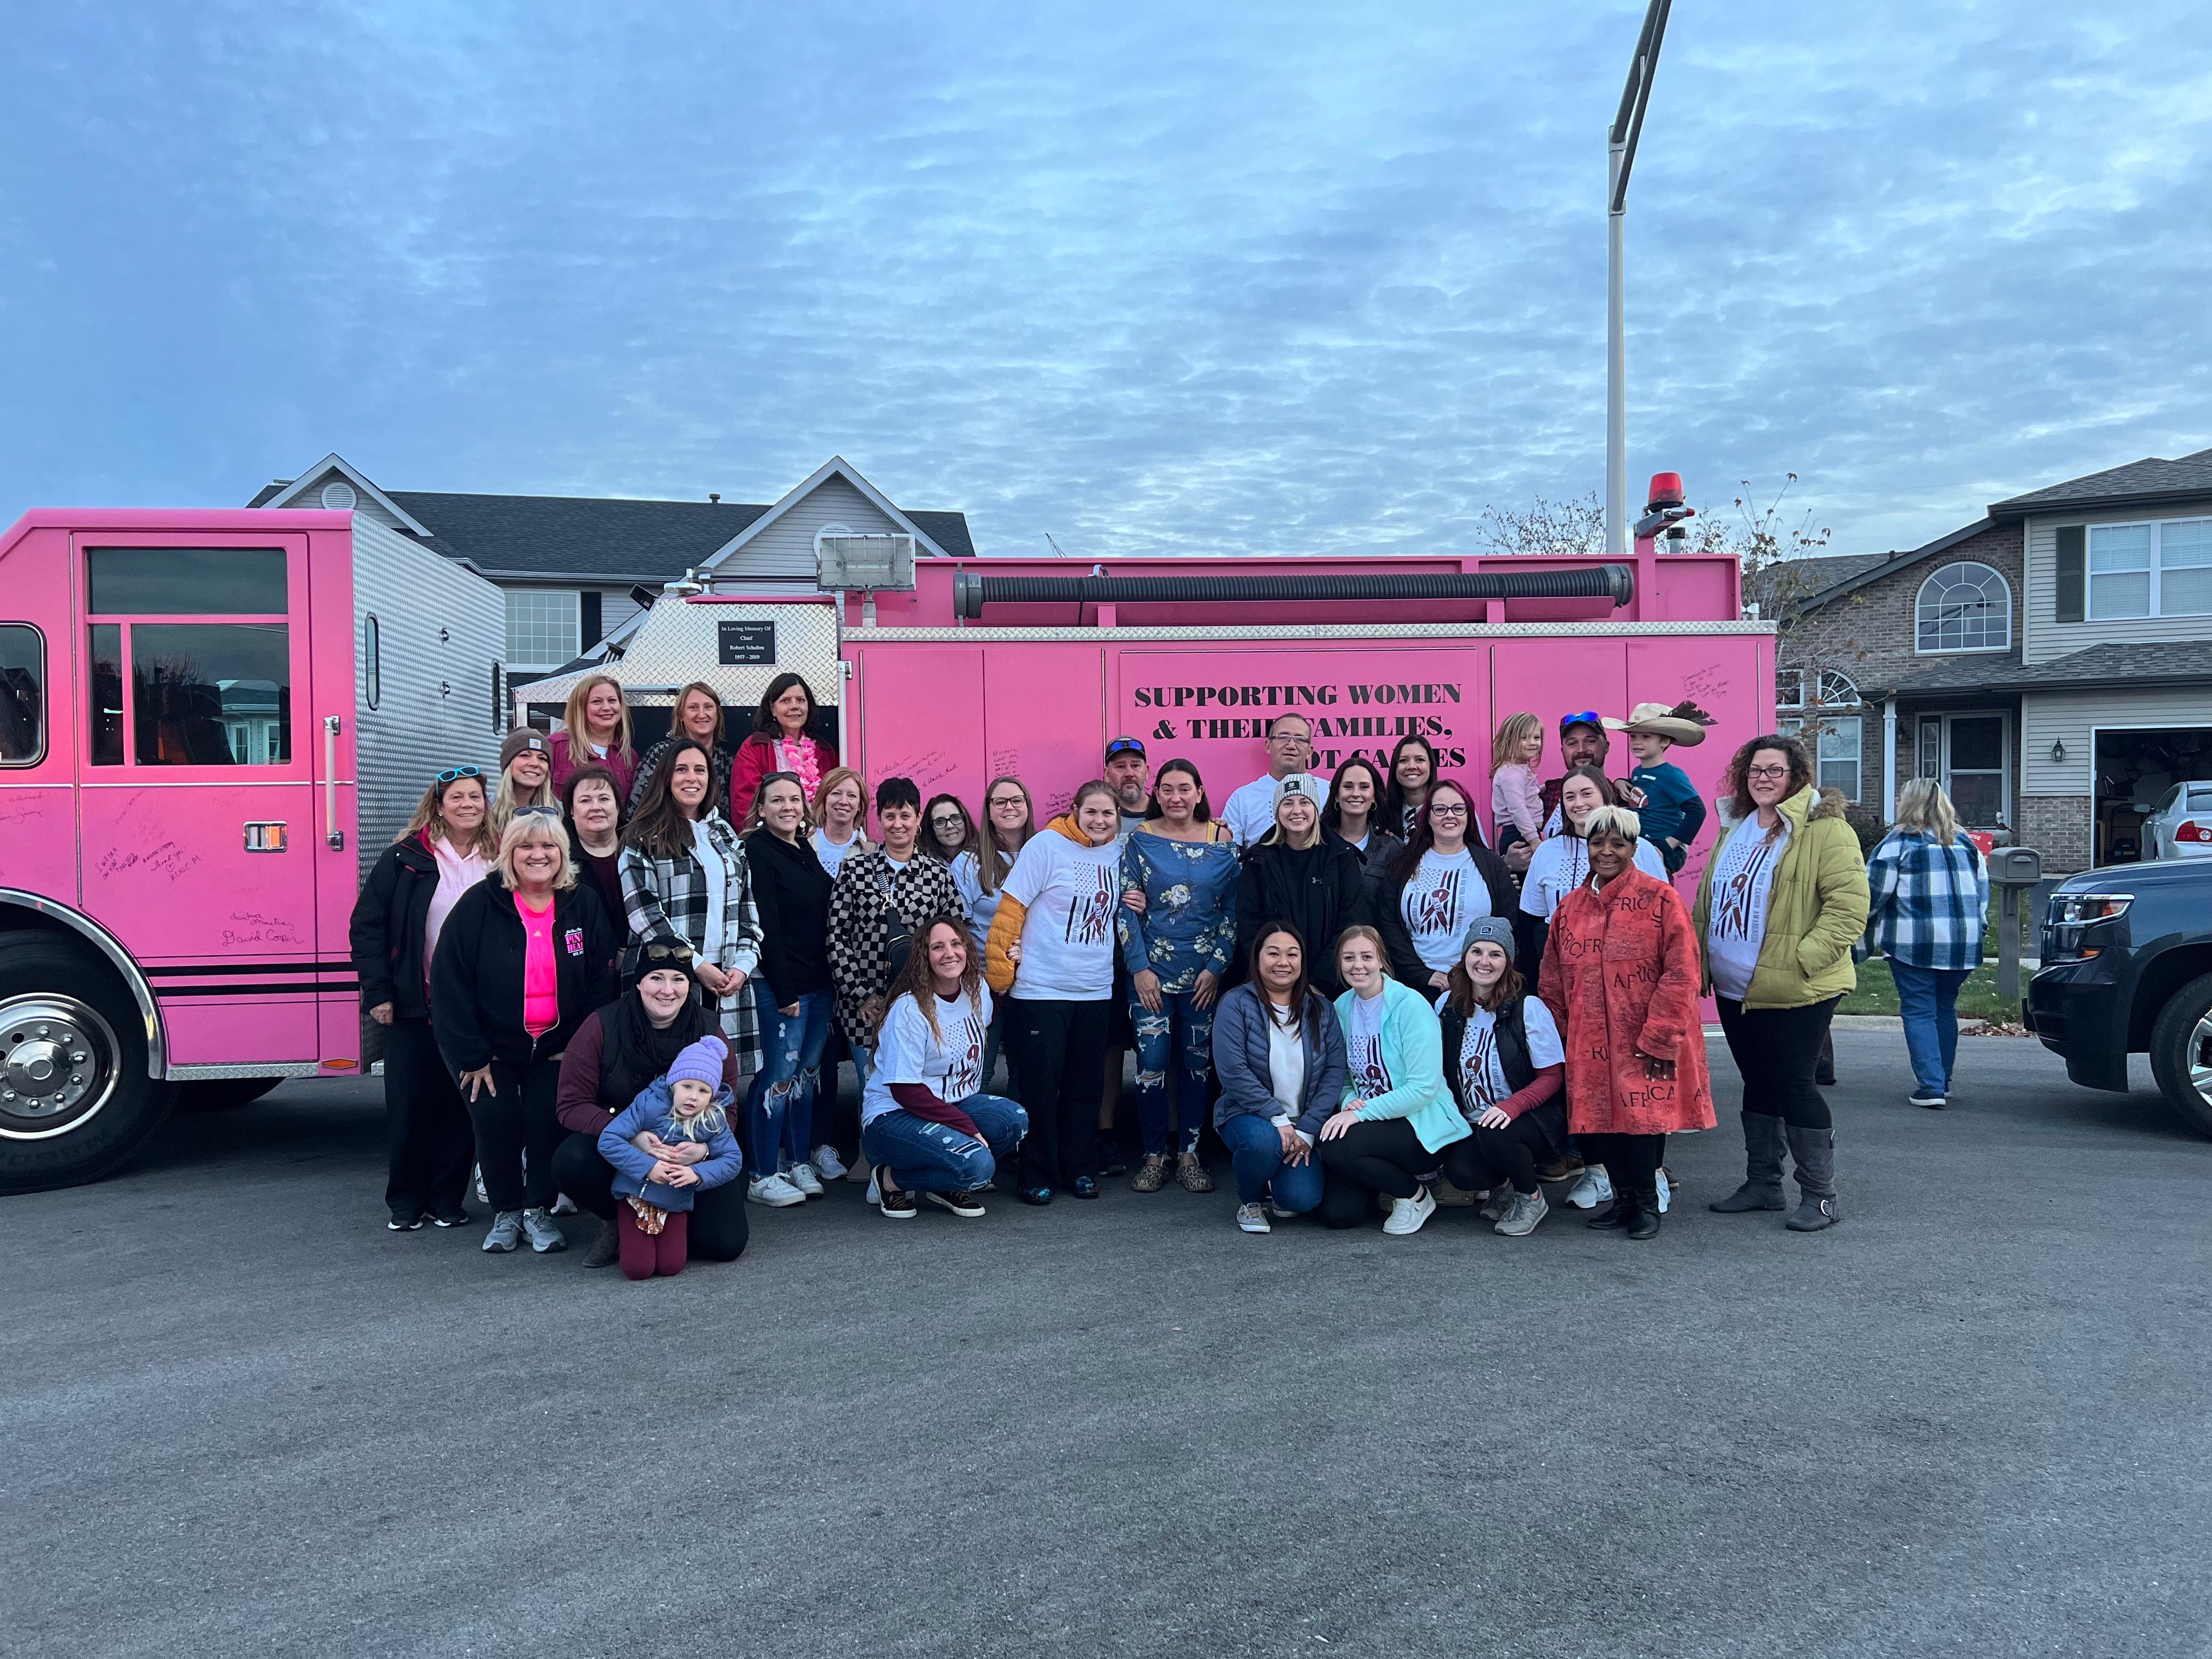 Hawk Volkswagen in Joliet has assisted the local chapter of the Pink Heals organization for seven years.  The nonprofit helps local women who have breast cancer and their families. This year, Hawk supported hundreds of families in Will county by organizing home visits driving Pink fire trucks and pink police car, donating money and Thanksgiving and Christmas meals.